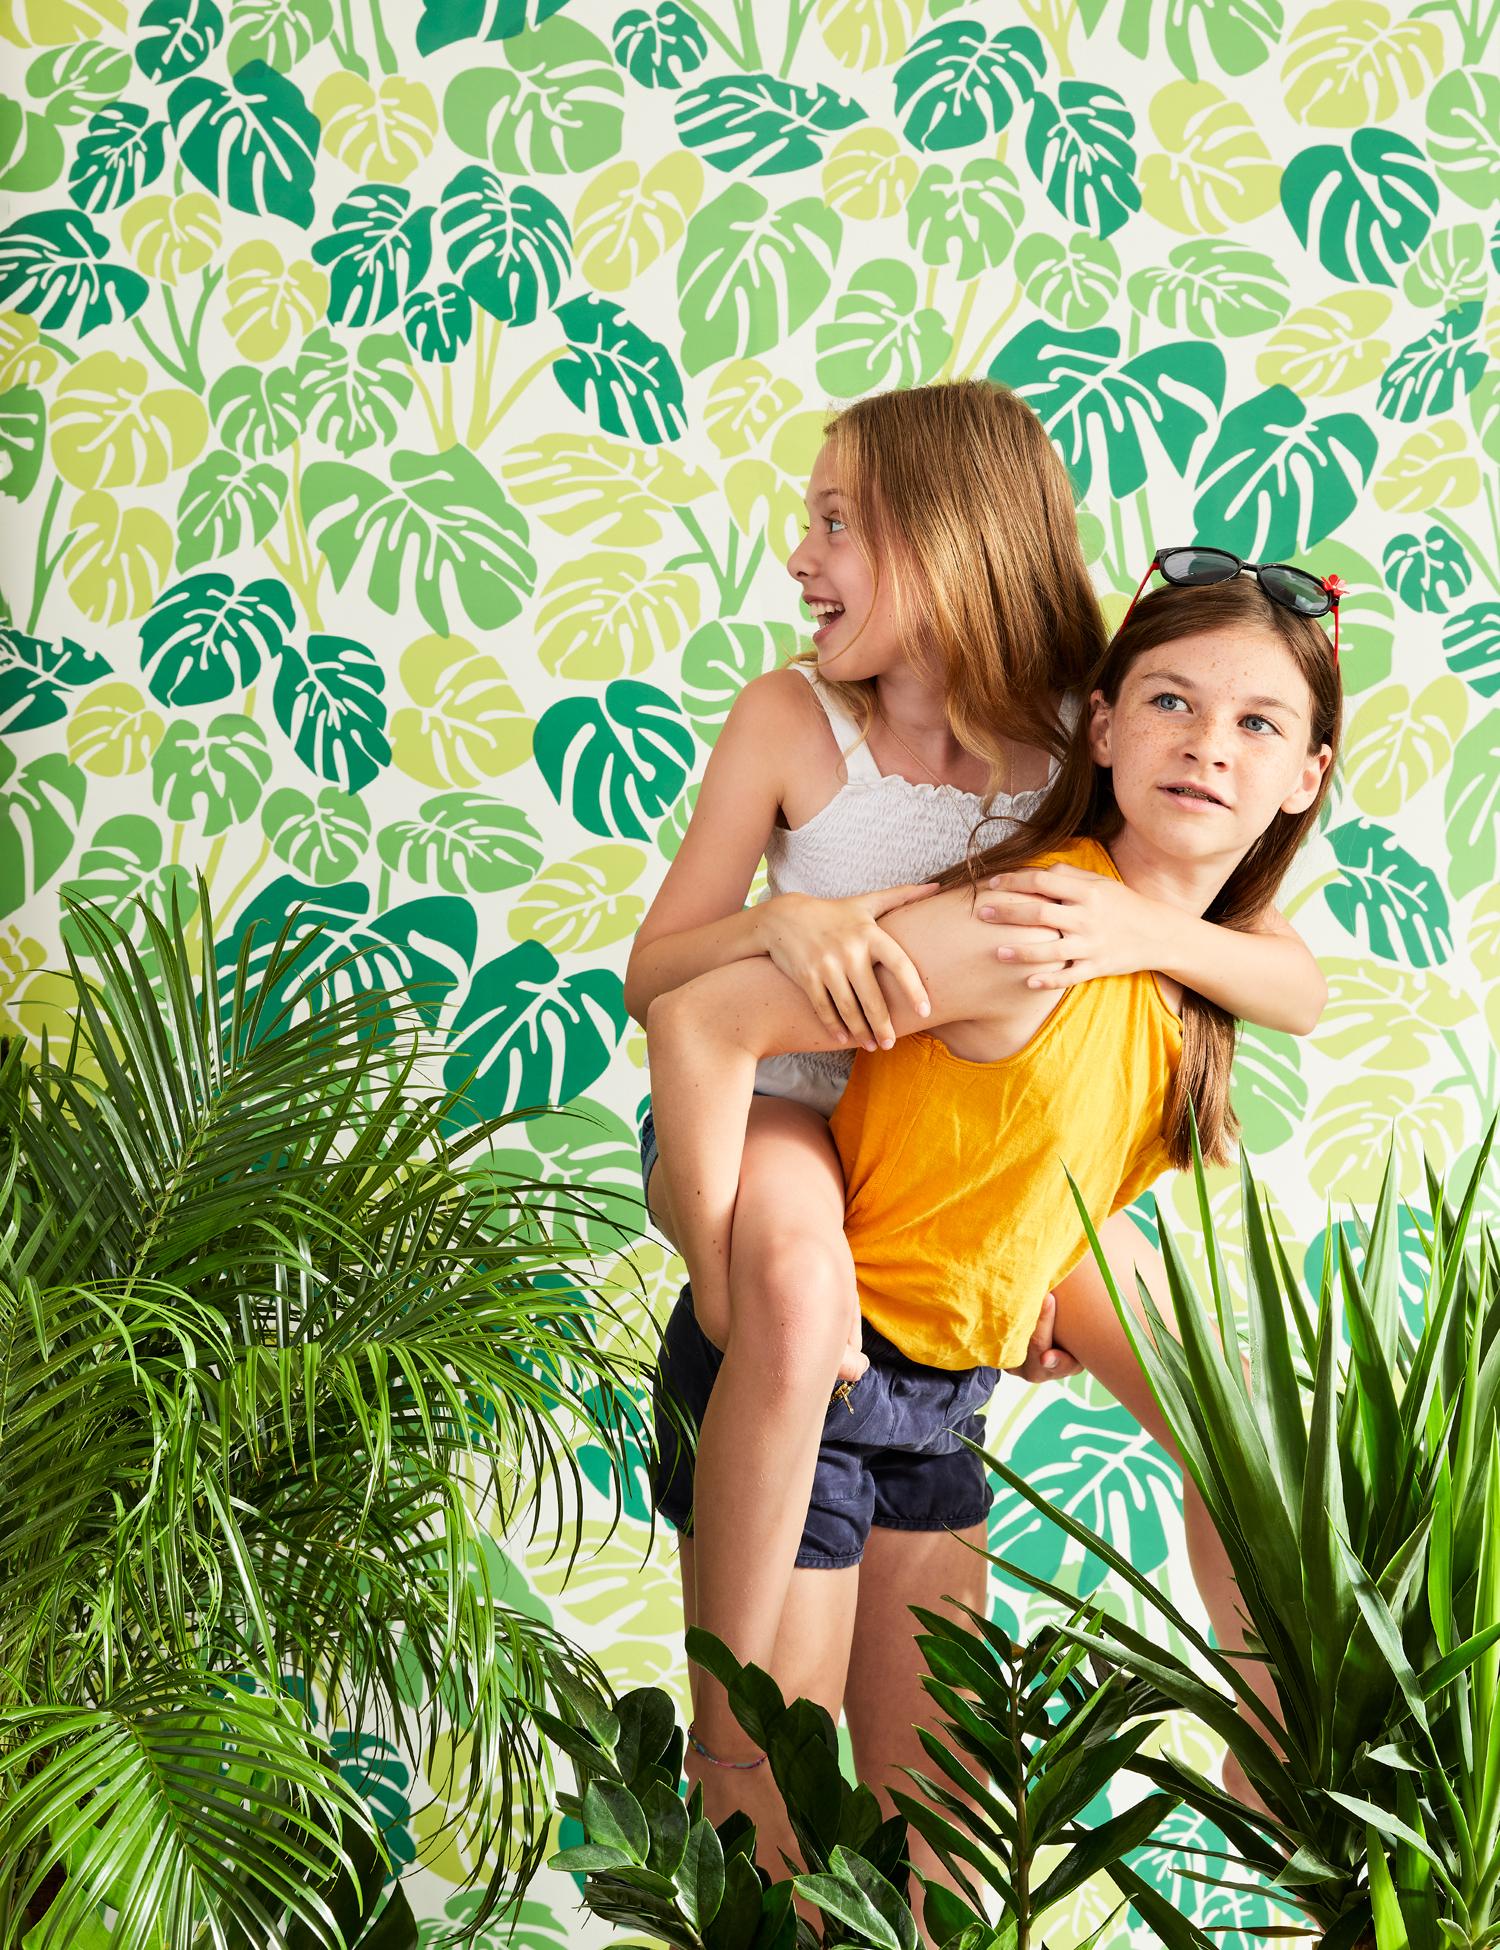 Want summer all year round? This monstera deliciosa leaf pattern brings the jungle into your home!
 
Samples are available for $18 including US shipping, please message us to purchase.  

Printing: Digital pigment print (minimum order of 4